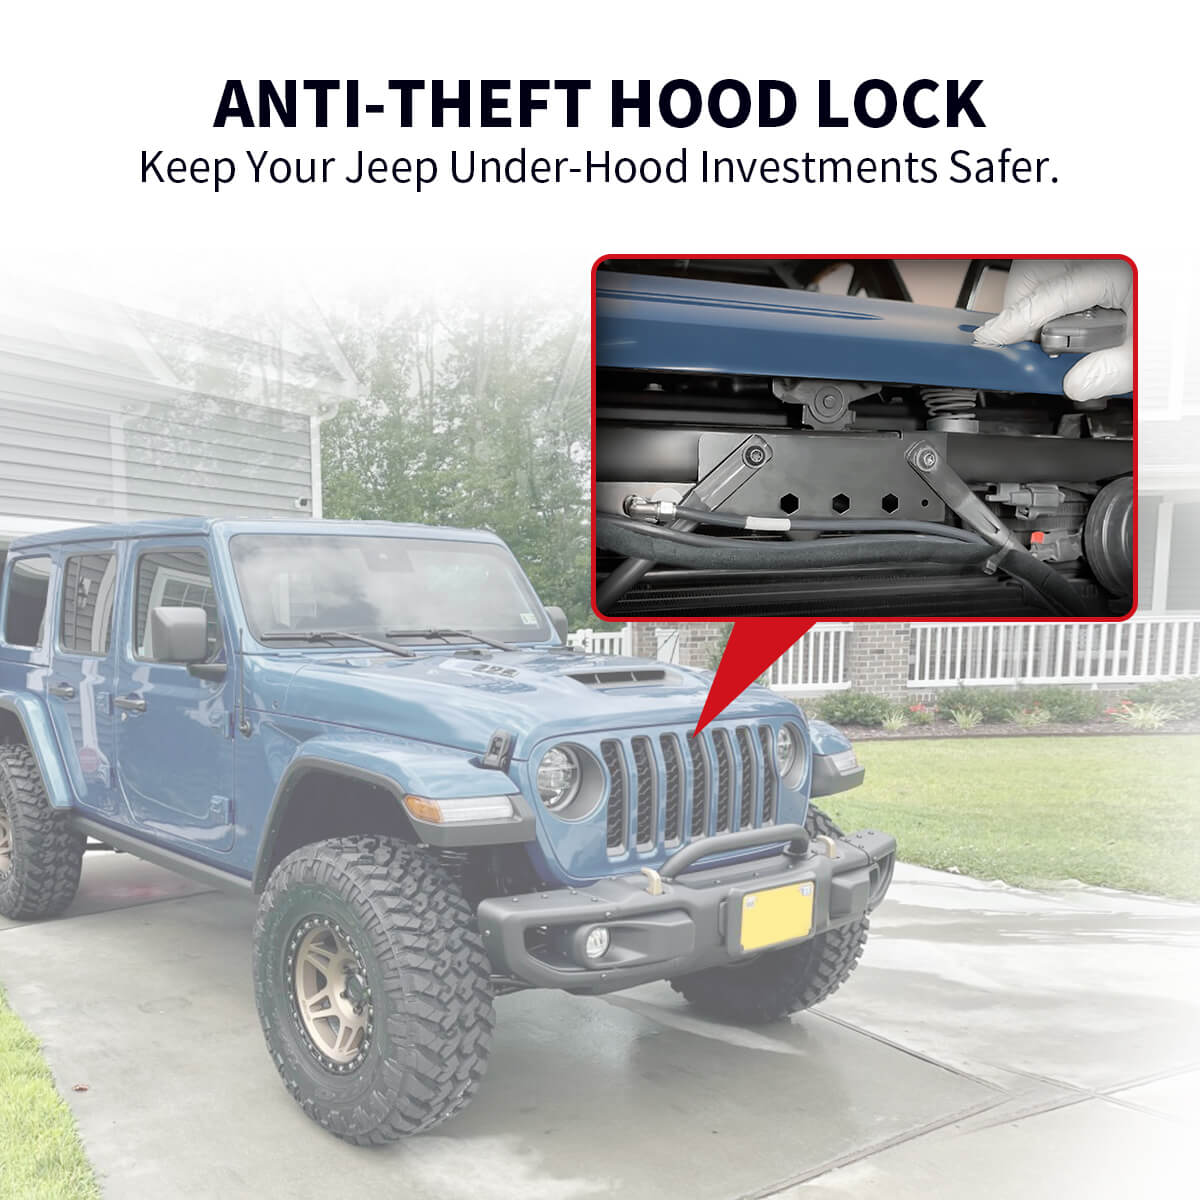 Lasfit Stealth Anti-Theft Automatic Hood Lock System for 18-23 Jeep Wr